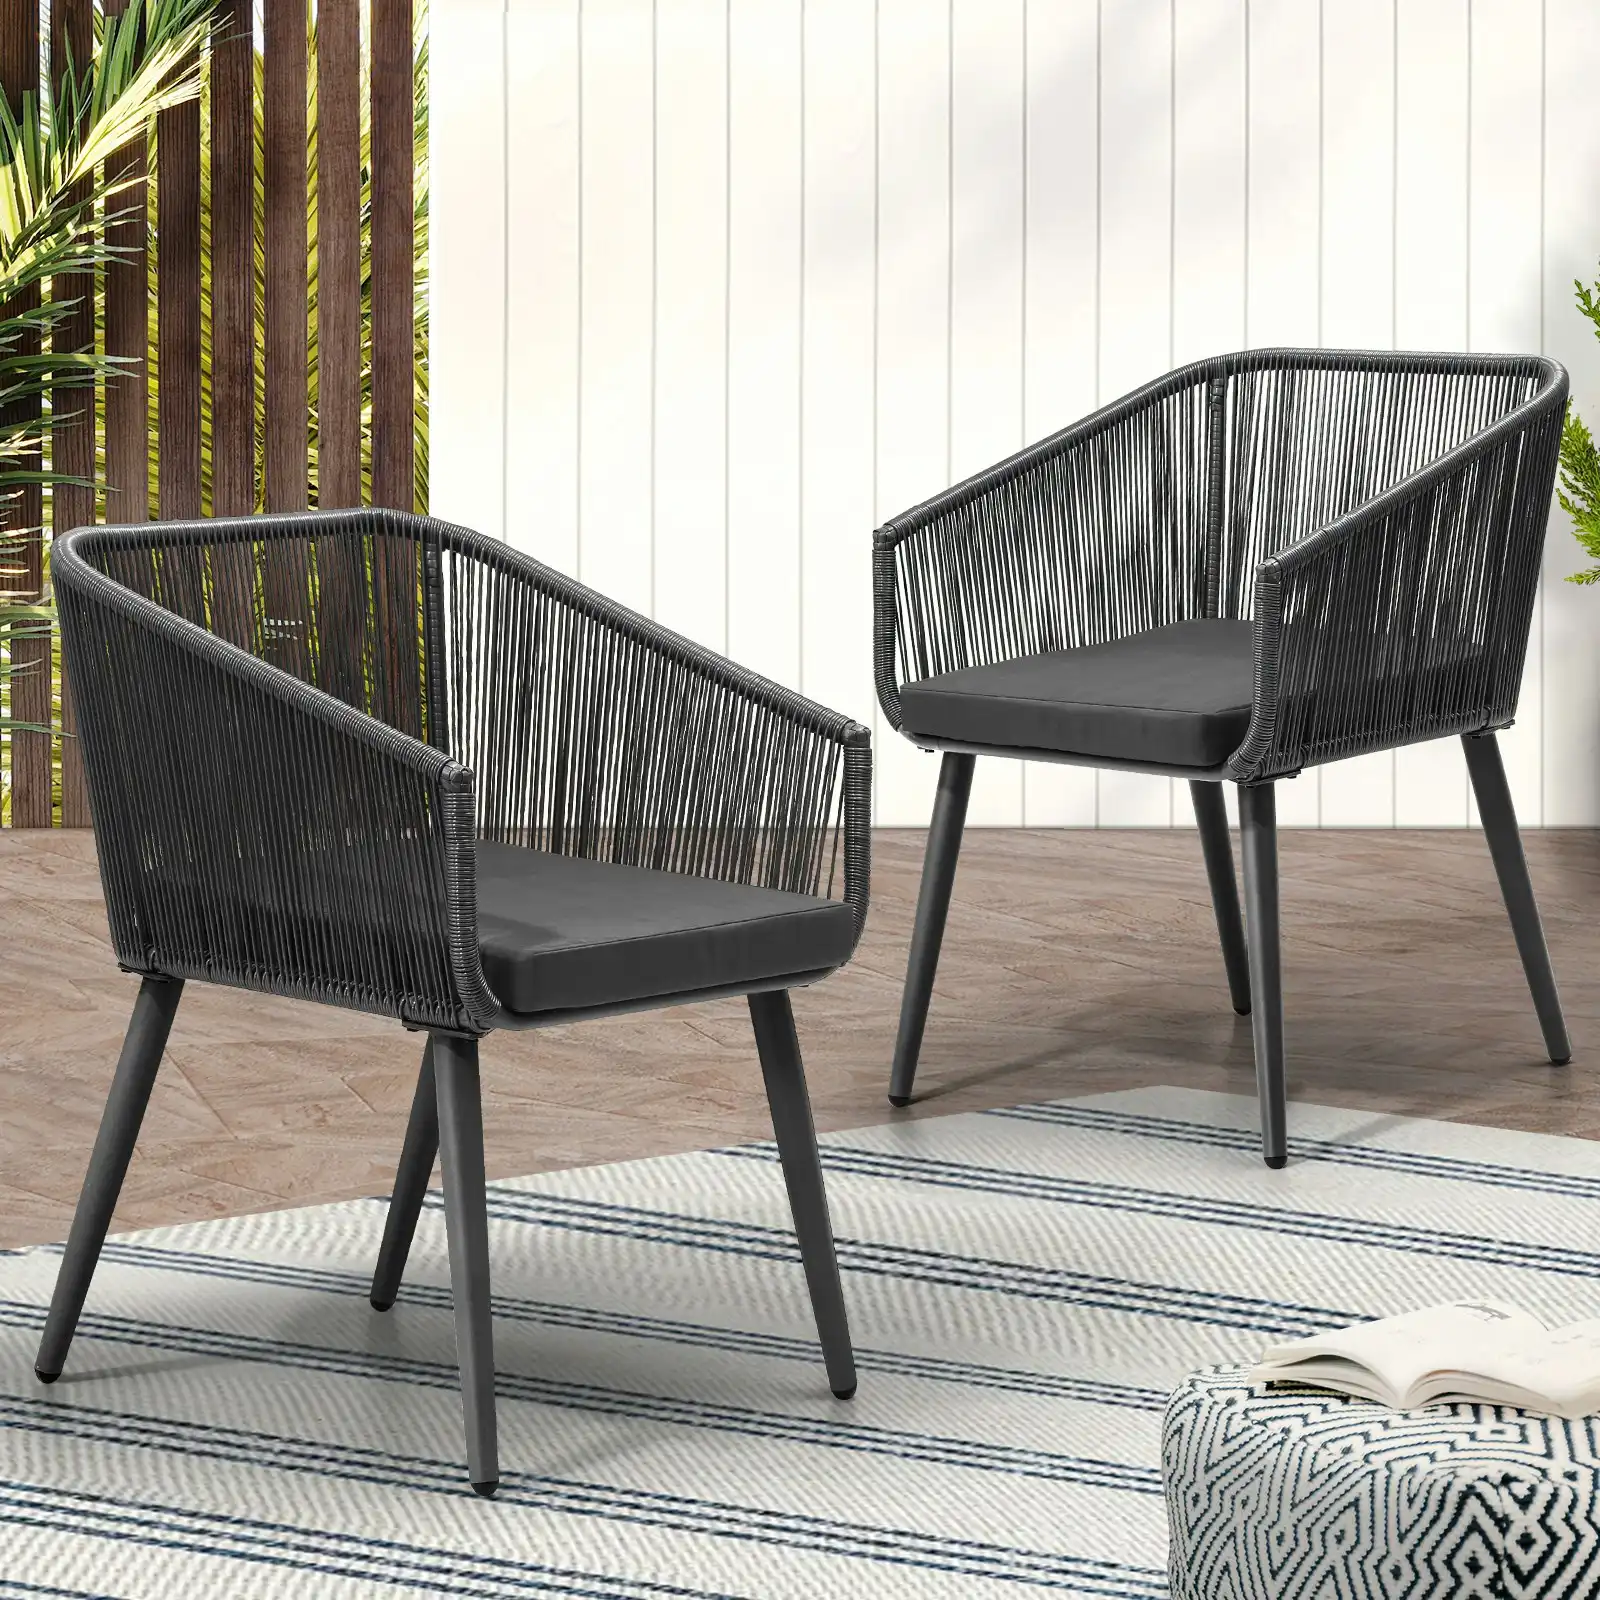 Livsip Outdoor Furniture Lounge Setting Chairs Set of 2 Bistro Patio Garden Set